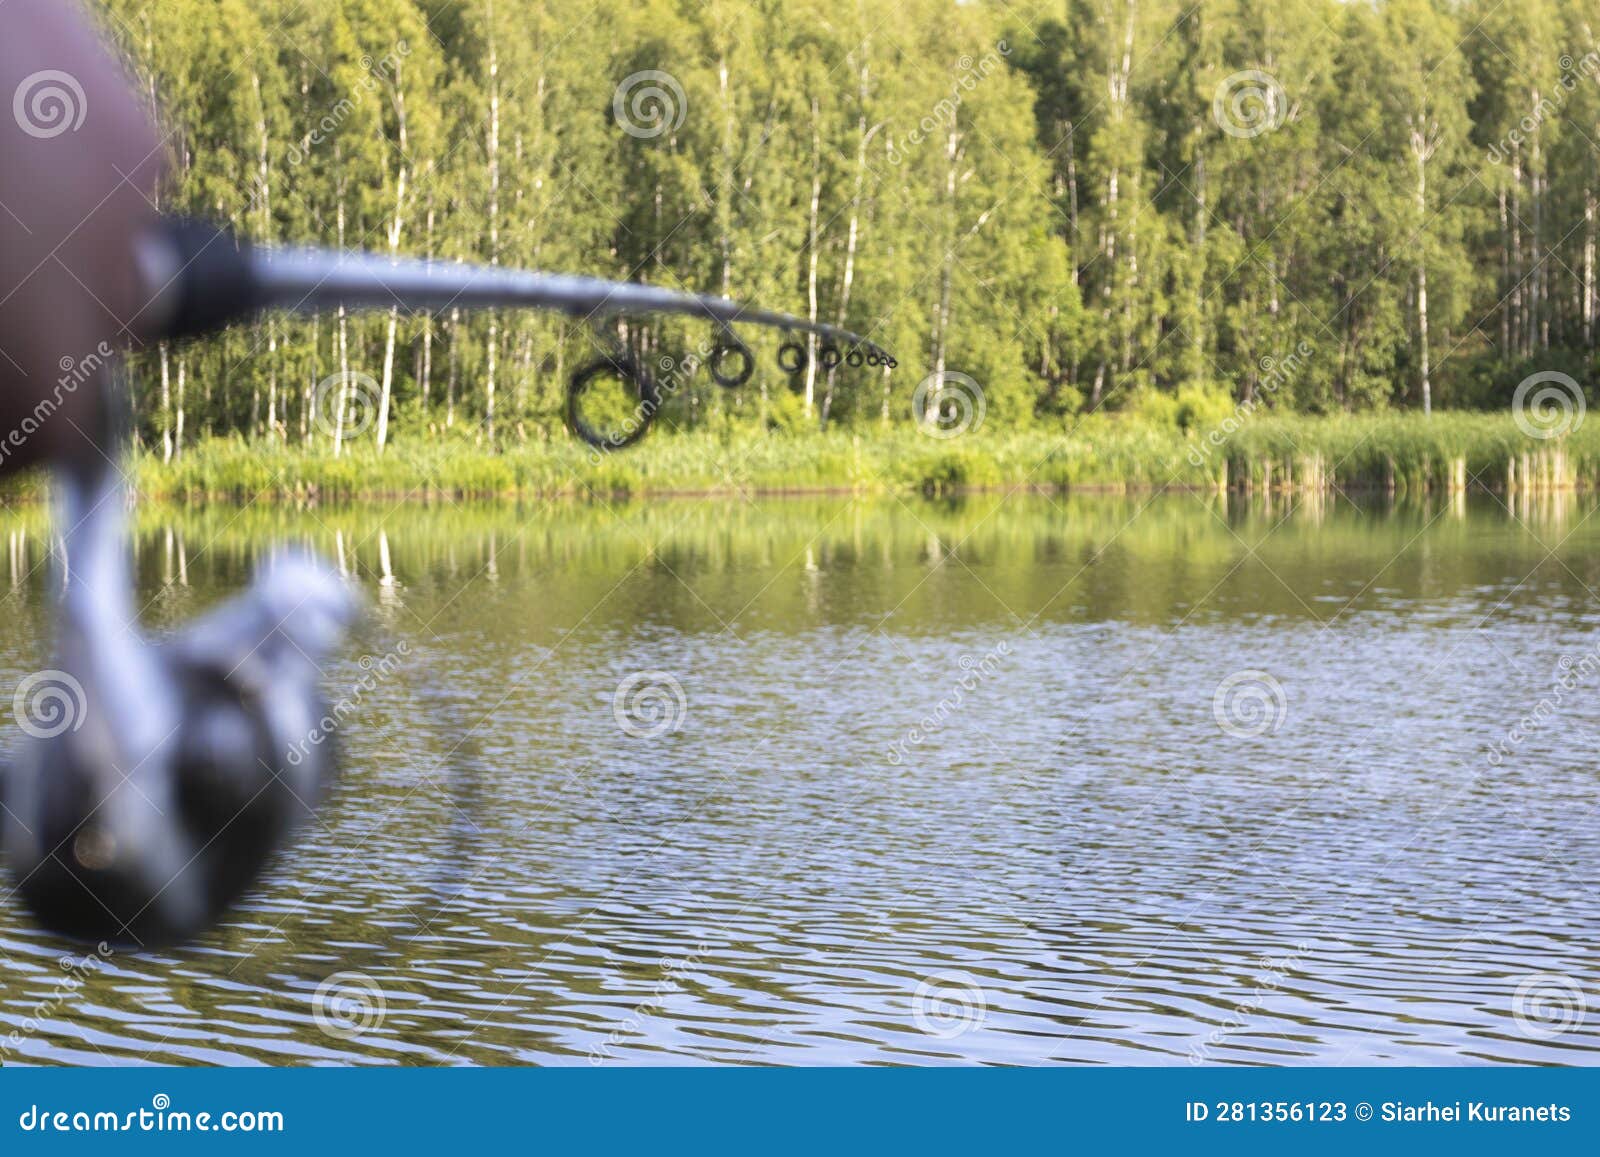 A Fisherman with Fishing Rods, a Spinning Reel on the River Bank